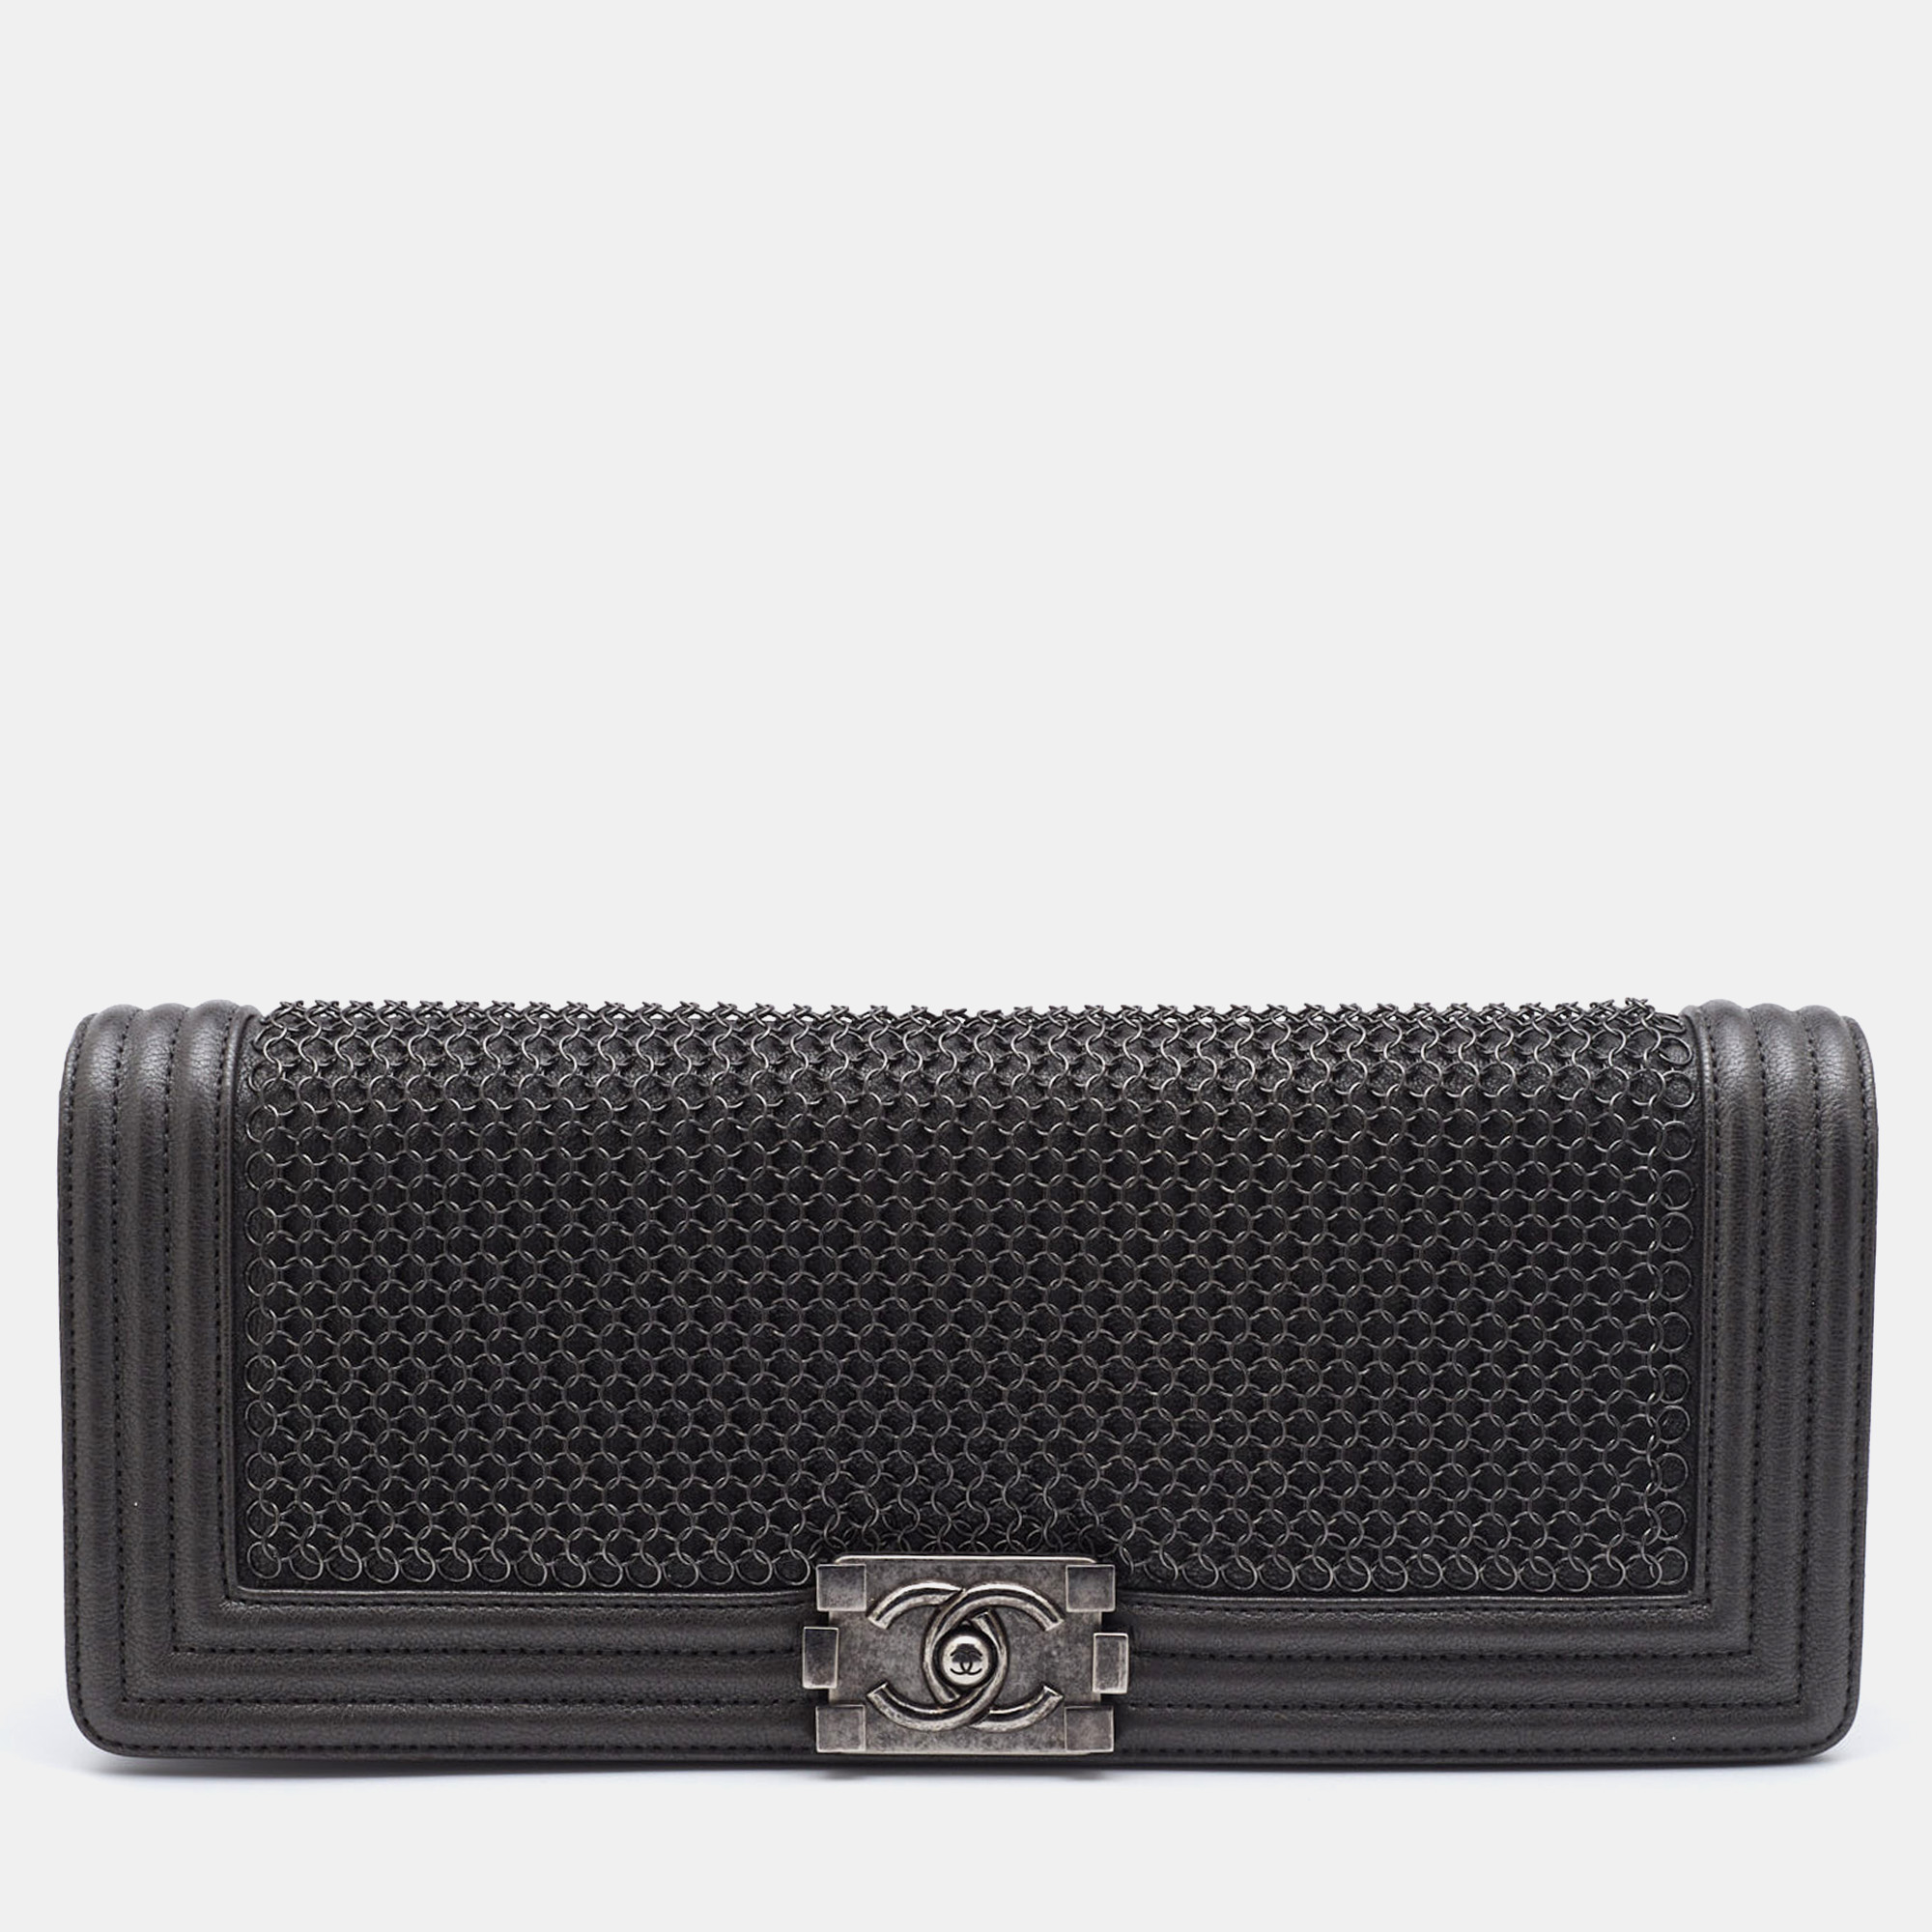 Pre-owned Chanel Metallic Grey Chainmail Leather Boy Clutch